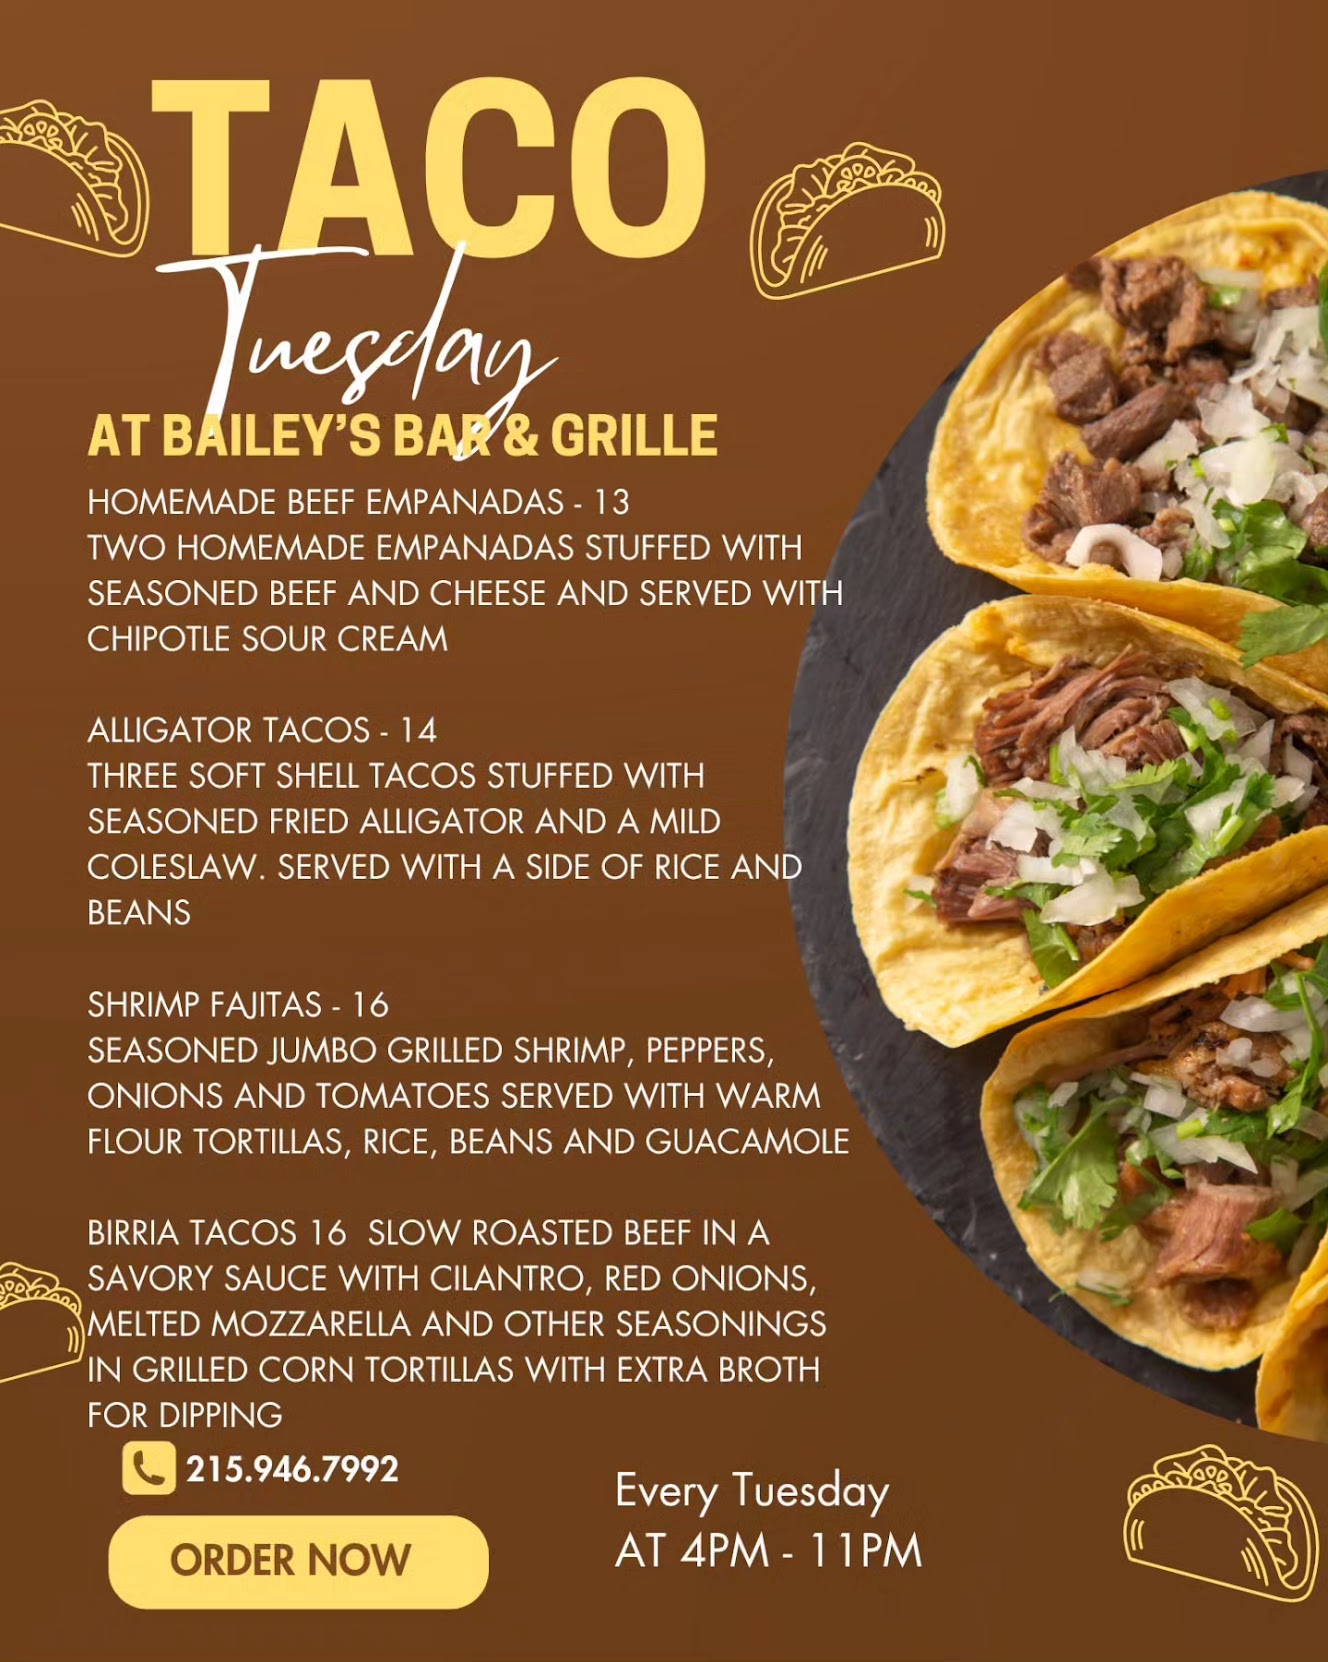 Taco tuesday promotional flyer for bailey's bar & grille featuring a variety of taco specials and contact information for orders.